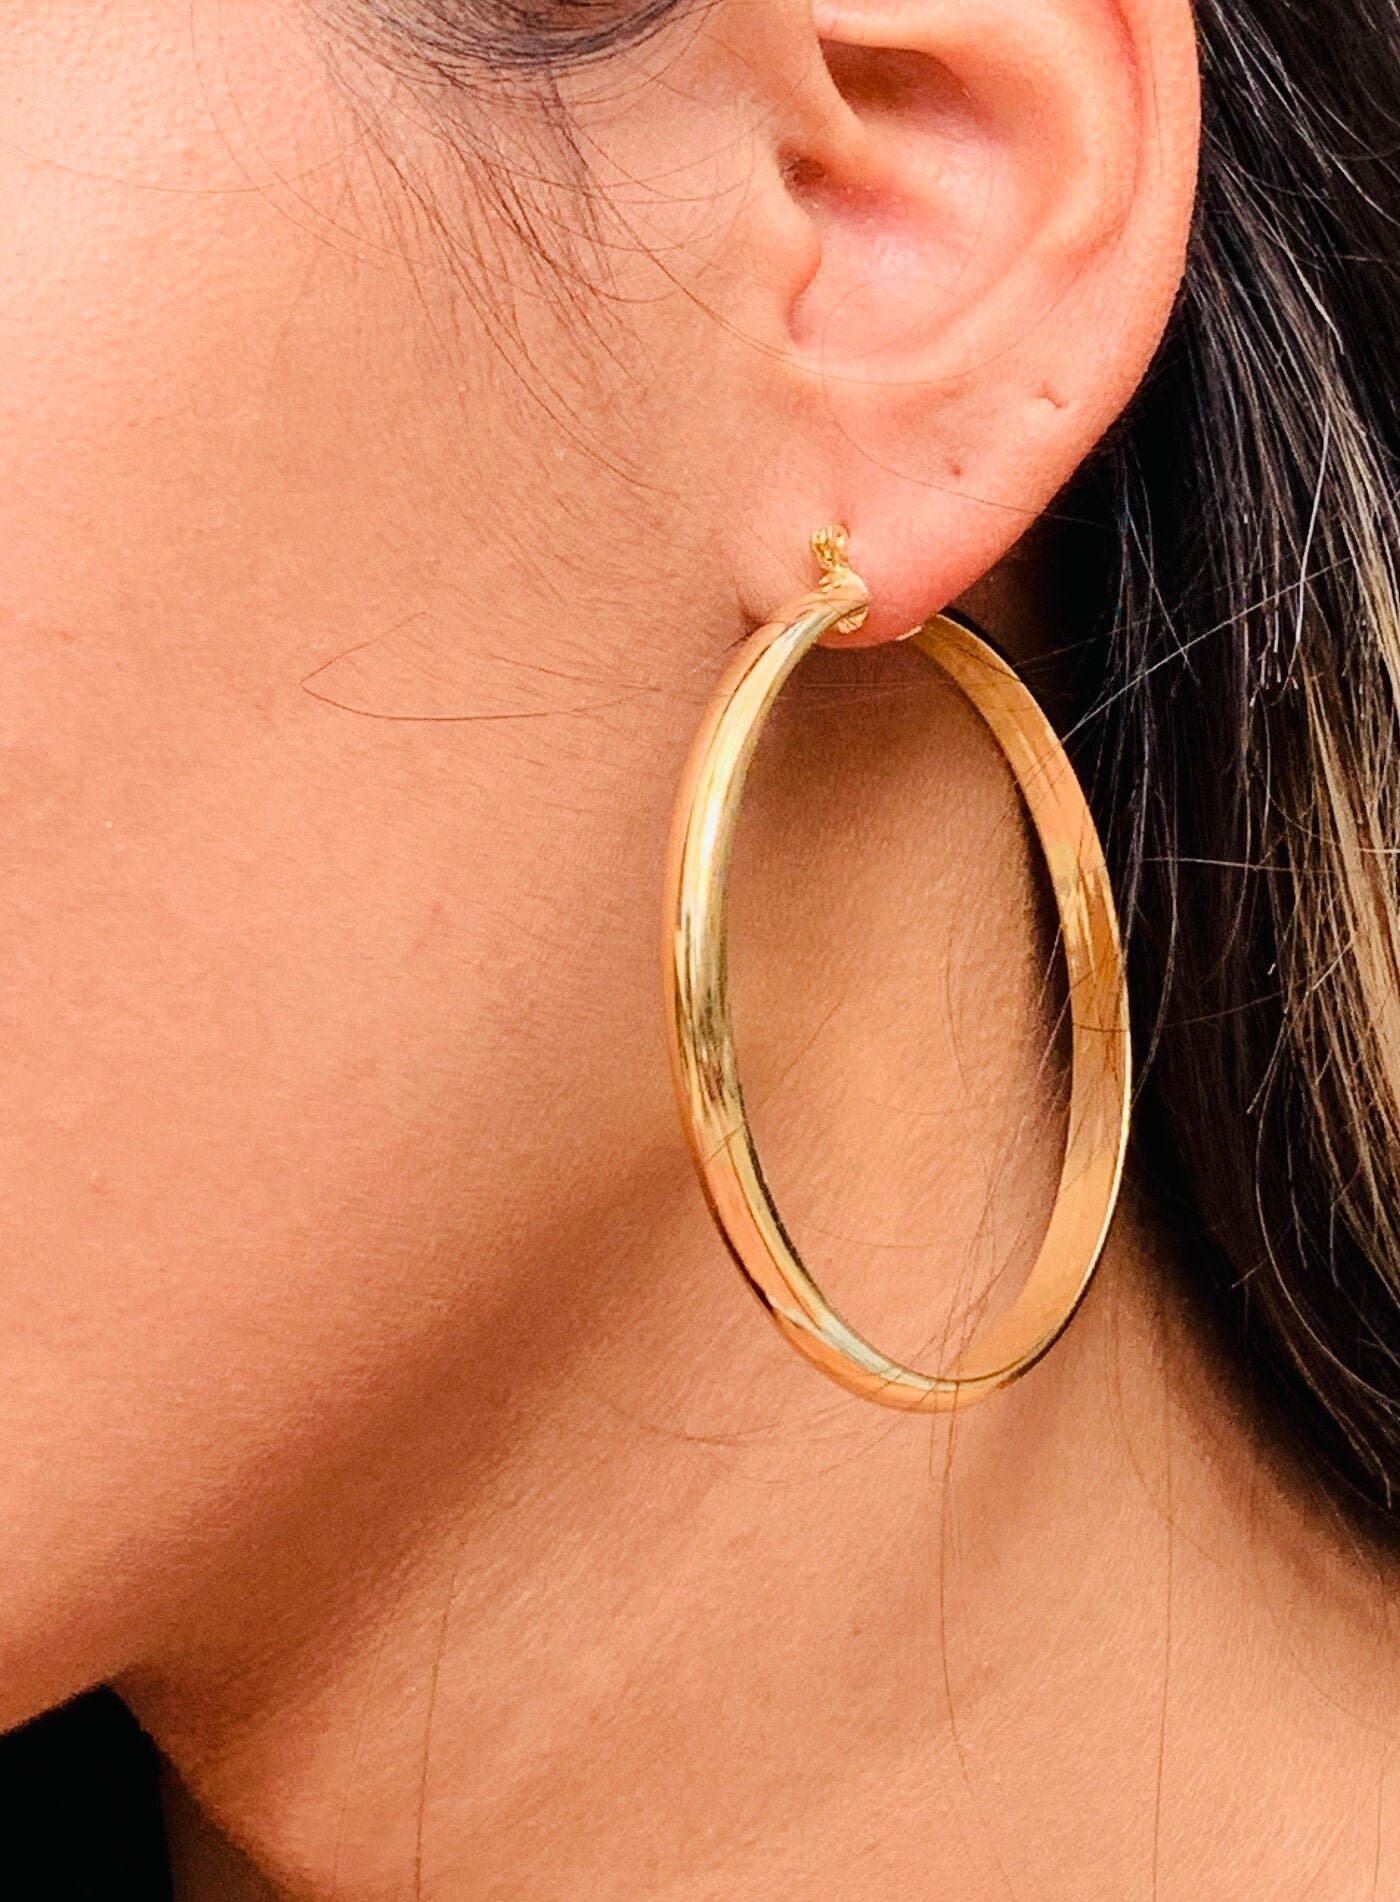 3 Inch Gold Metal Rings Hoops for Crafts Bulk Wholesale 10 Pieces 